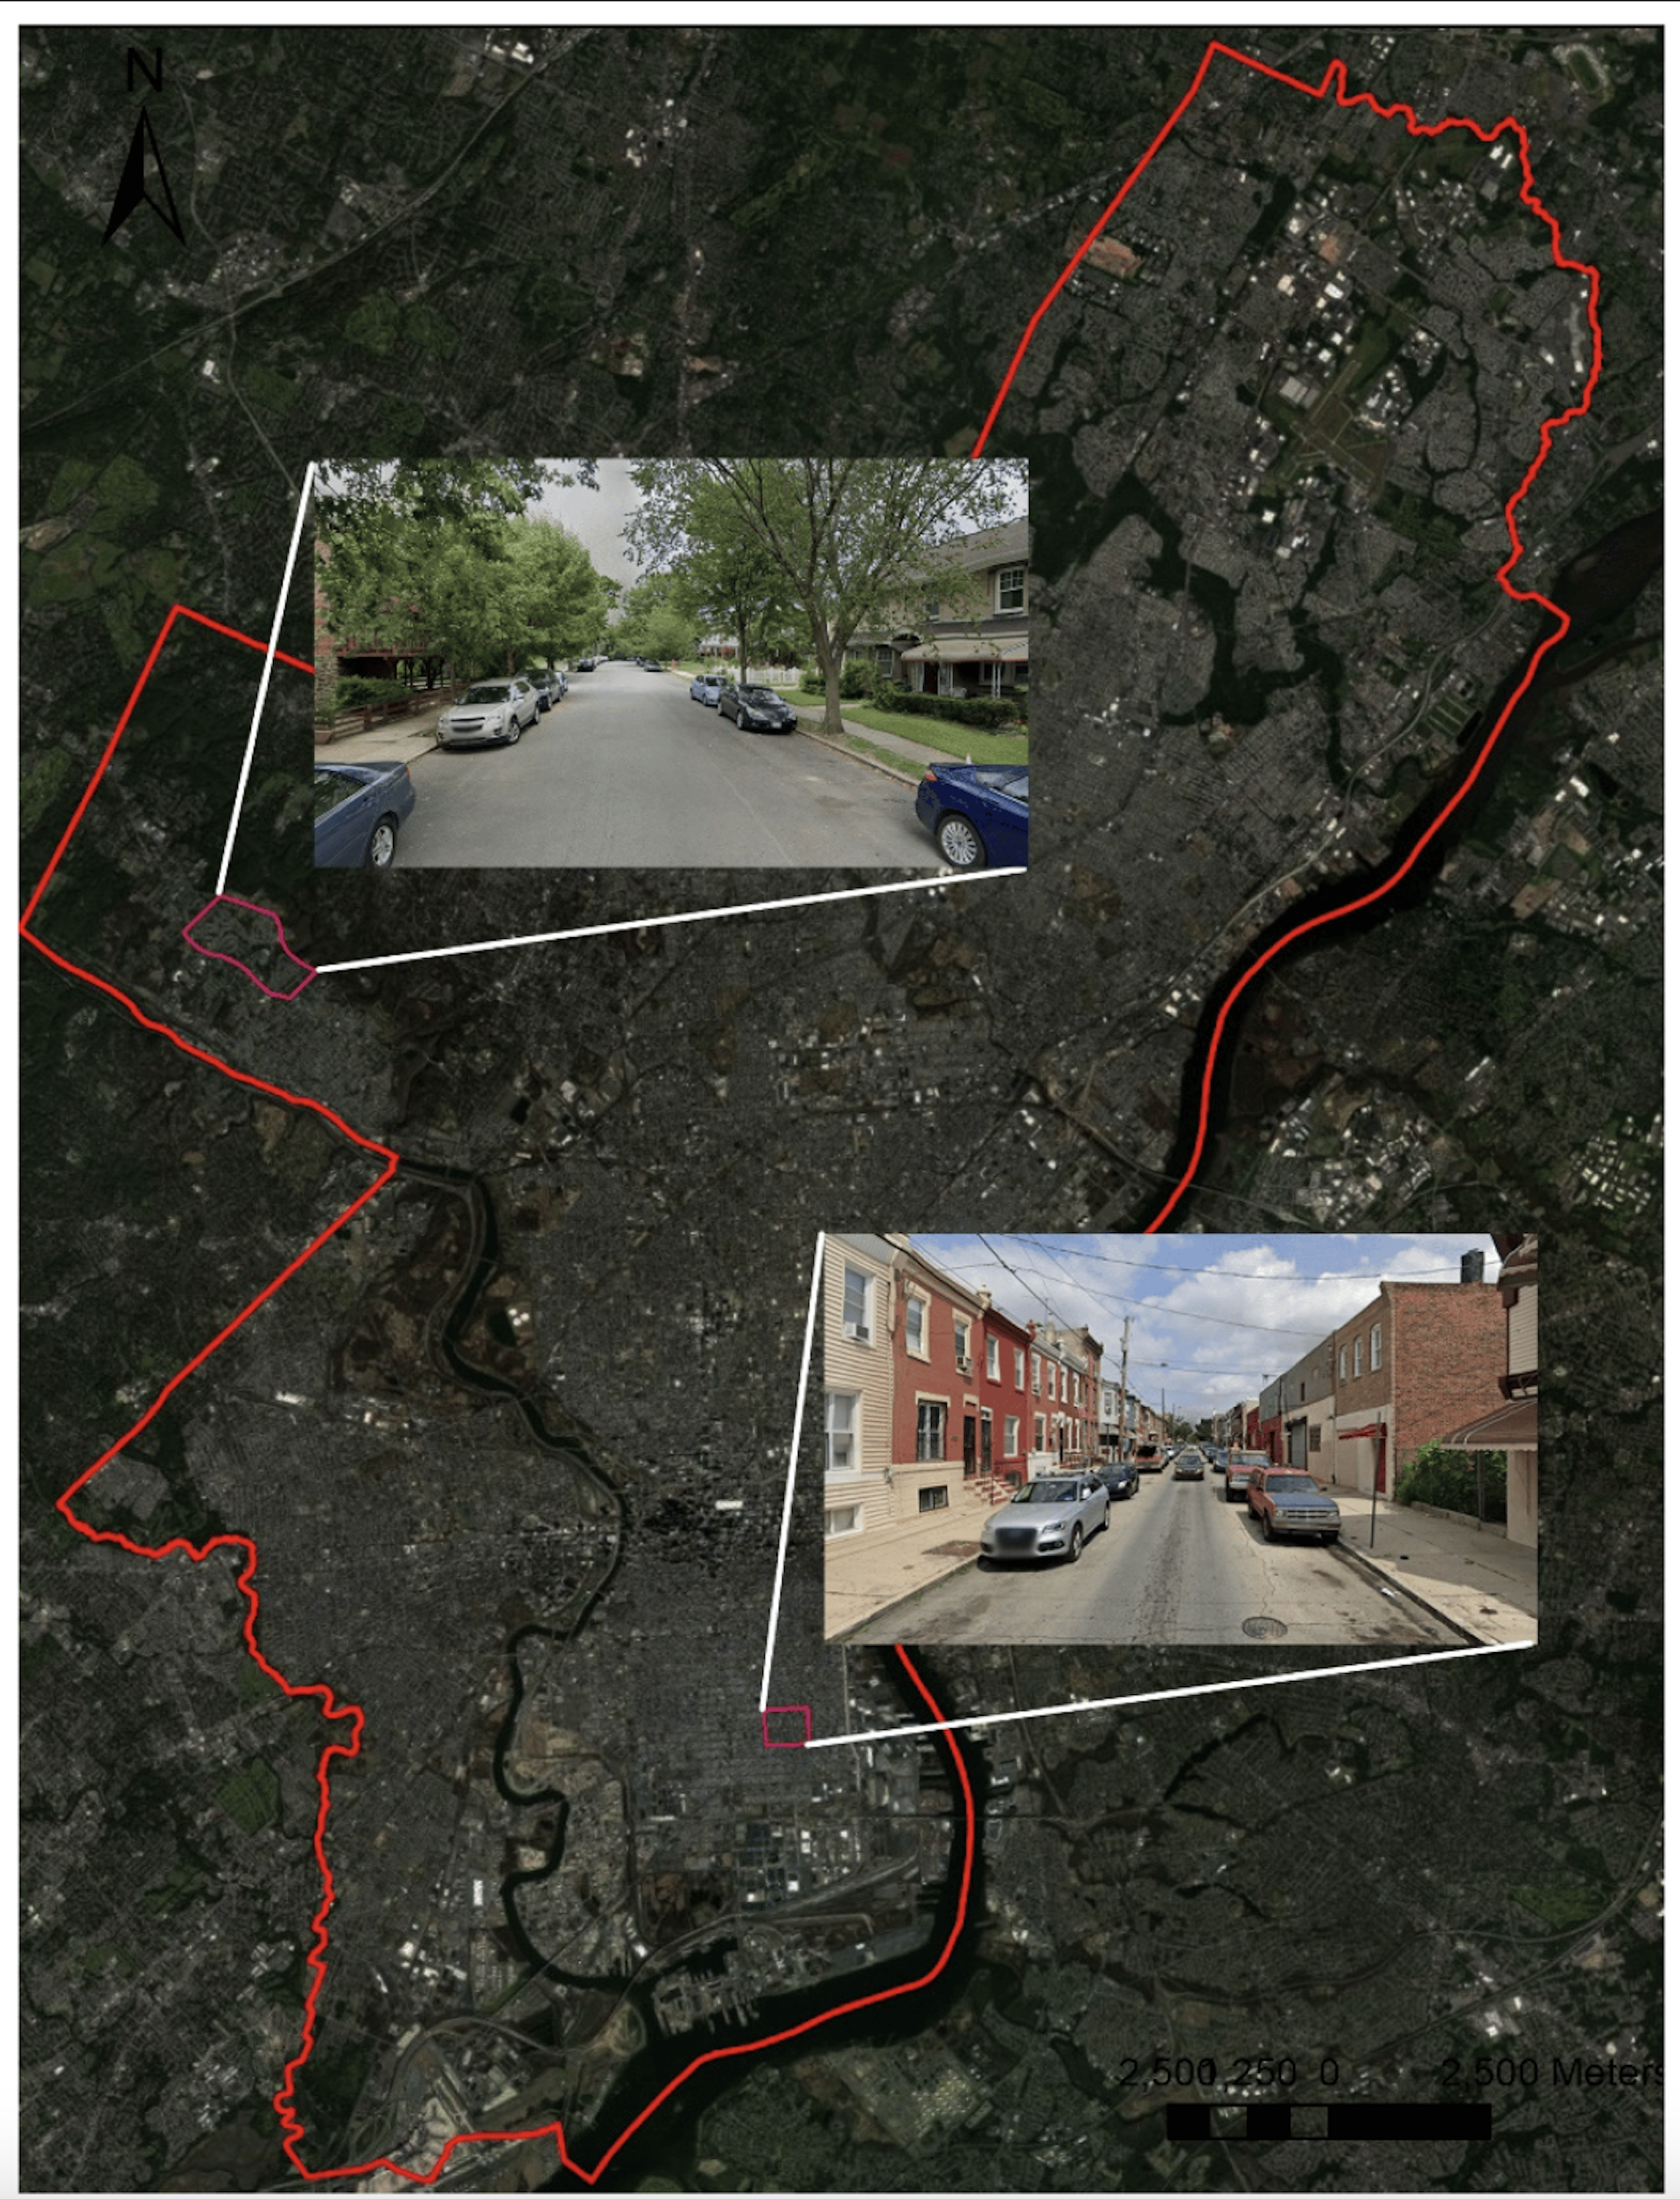 Two photos are inset on a map of Philadelphia. On the top left is a green neighbor with a wide street with parked cars. The lower photo shows brick townhouses set on a narrower street.